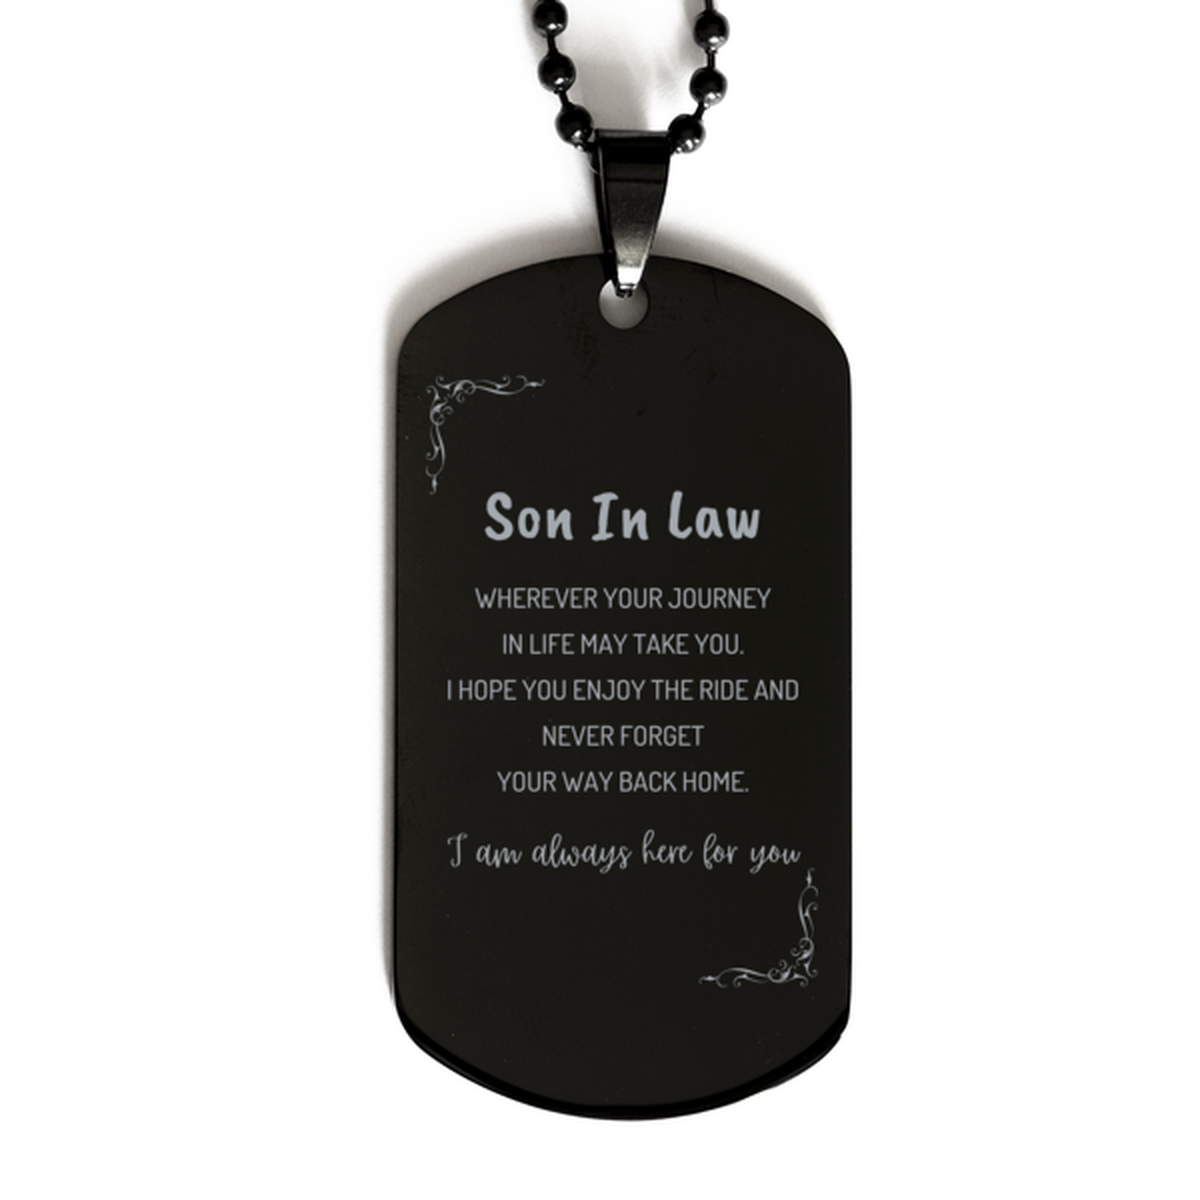 Son In Law wherever your journey in life may take you, I am always here for you Son In Law Black Dog Tag, Awesome Christmas Gifts For Son In Law, Son In Law Birthday Gifts for Men Women Family Loved One